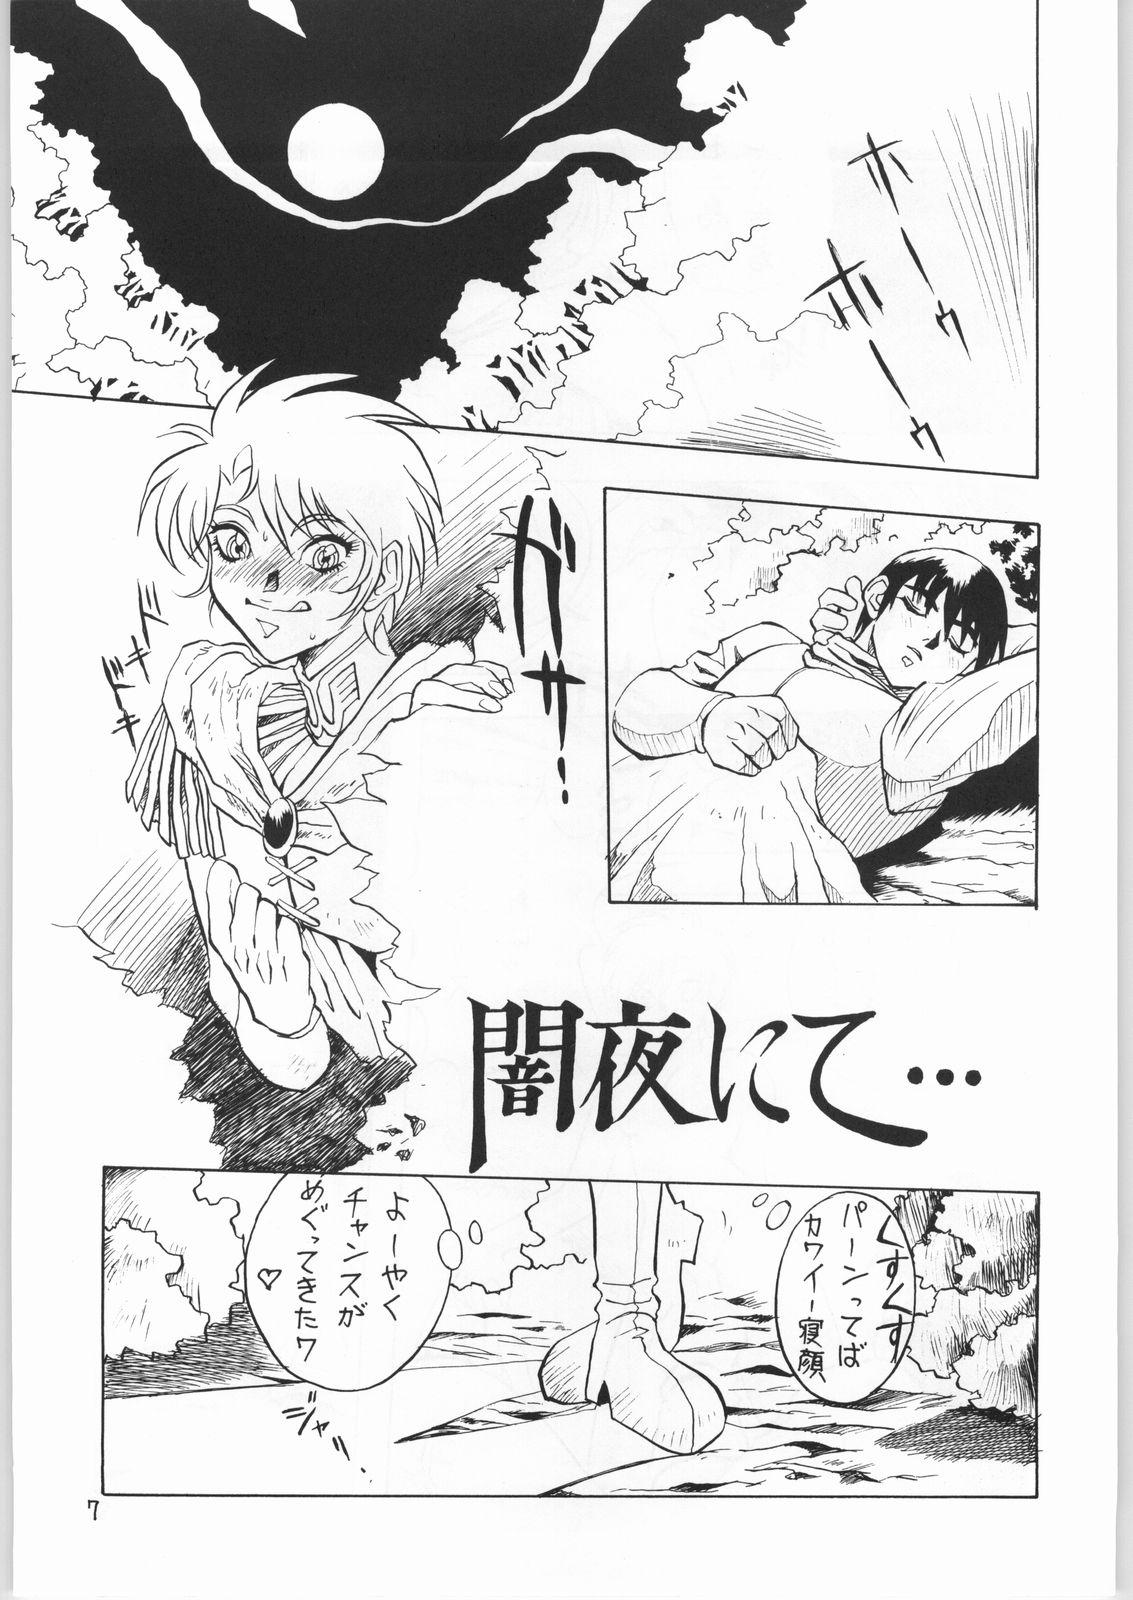 Collar Heroic Dreams - Record of lodoss war Swing - Page 6